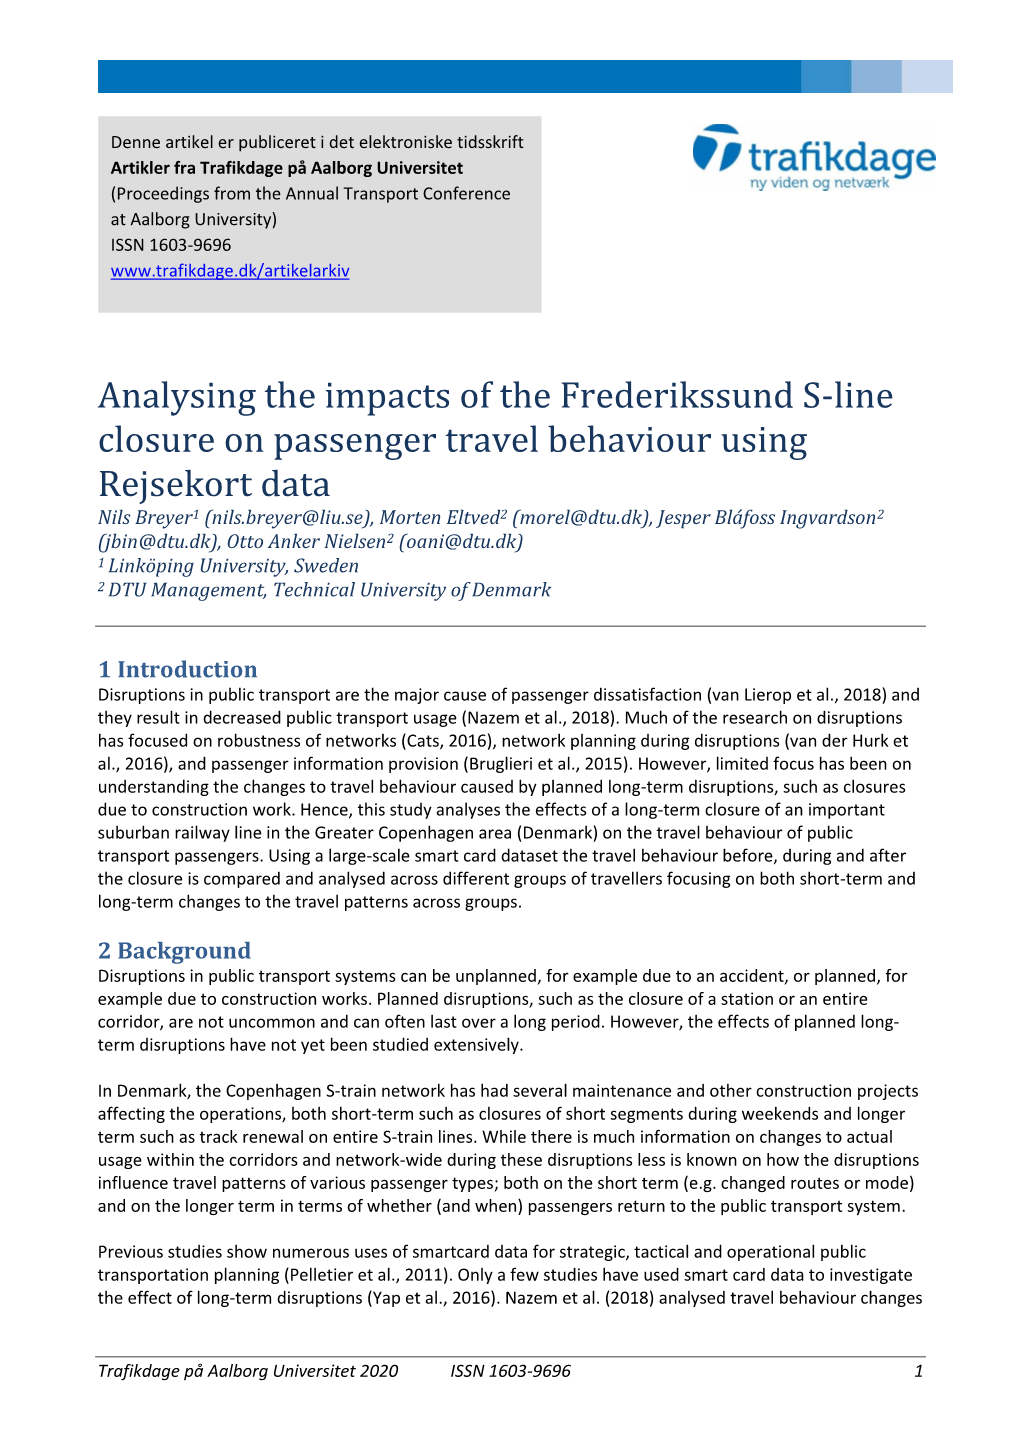 Analysing the Impacts of the Frederikssund S-Line Closure On